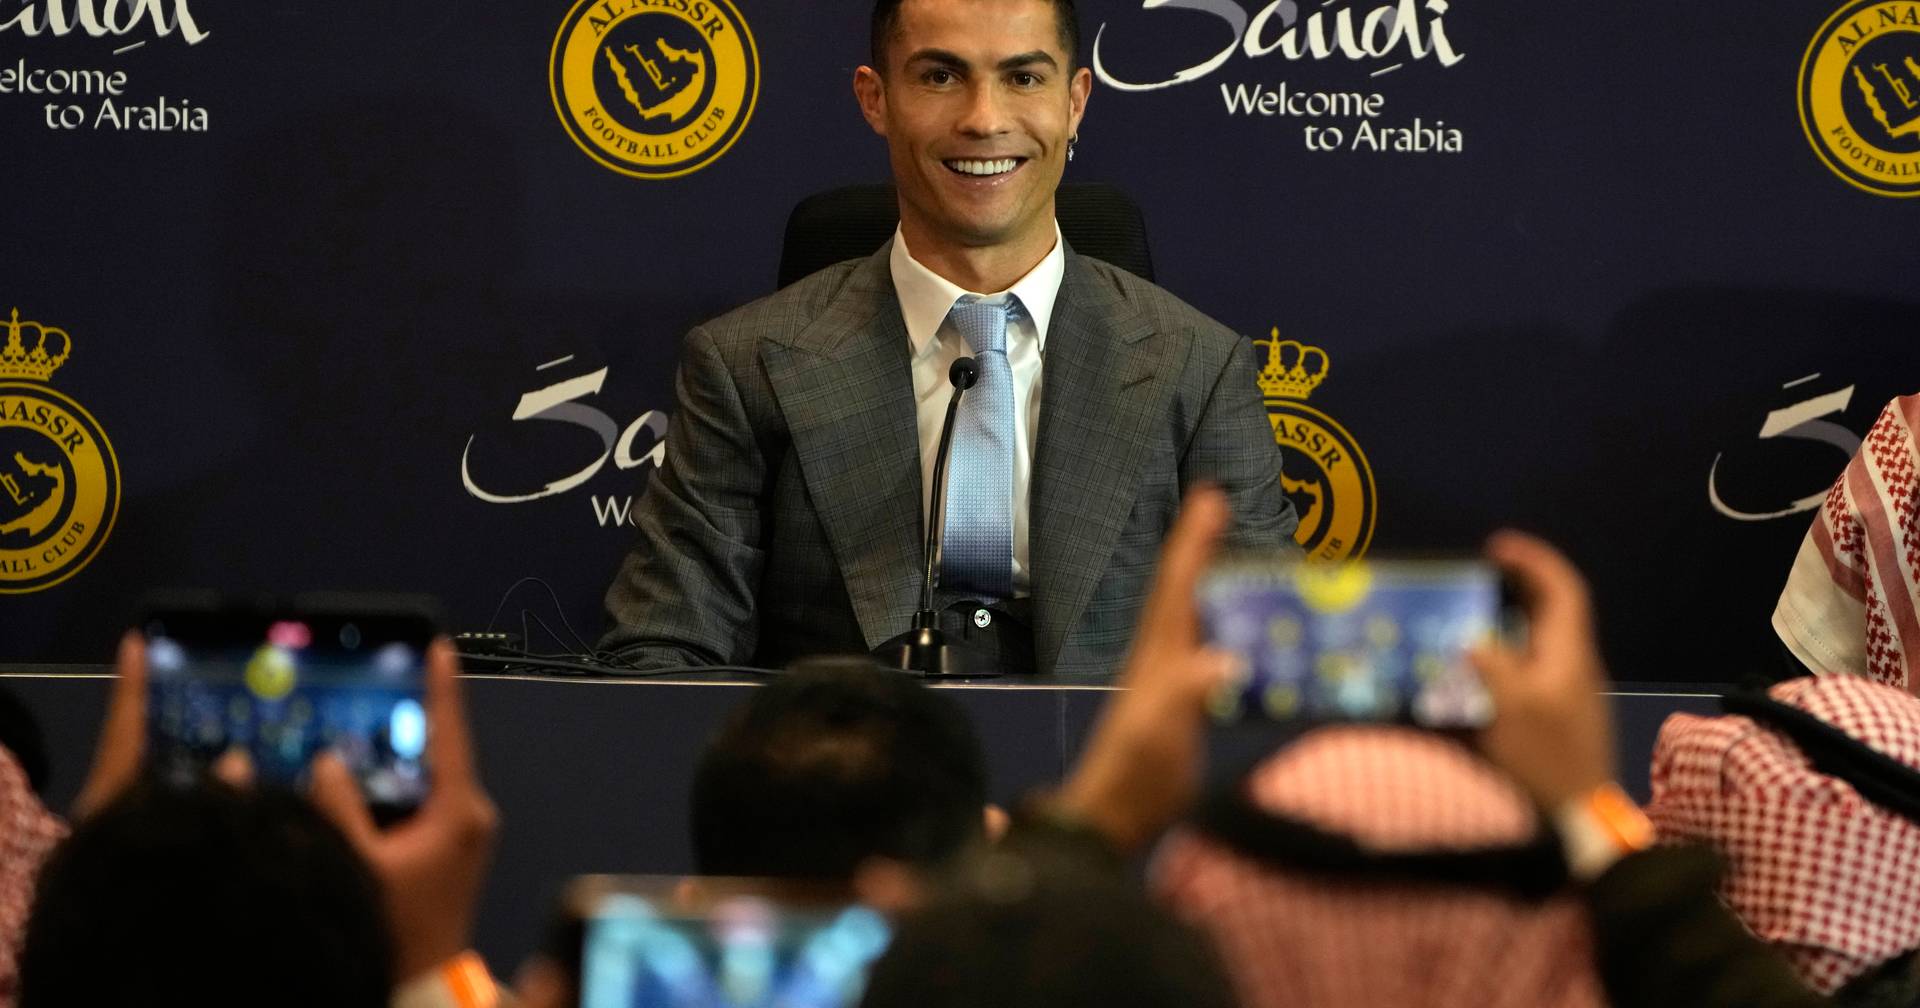 Cristiano Ronaldo presents to the victory fans after a “warm welcome”